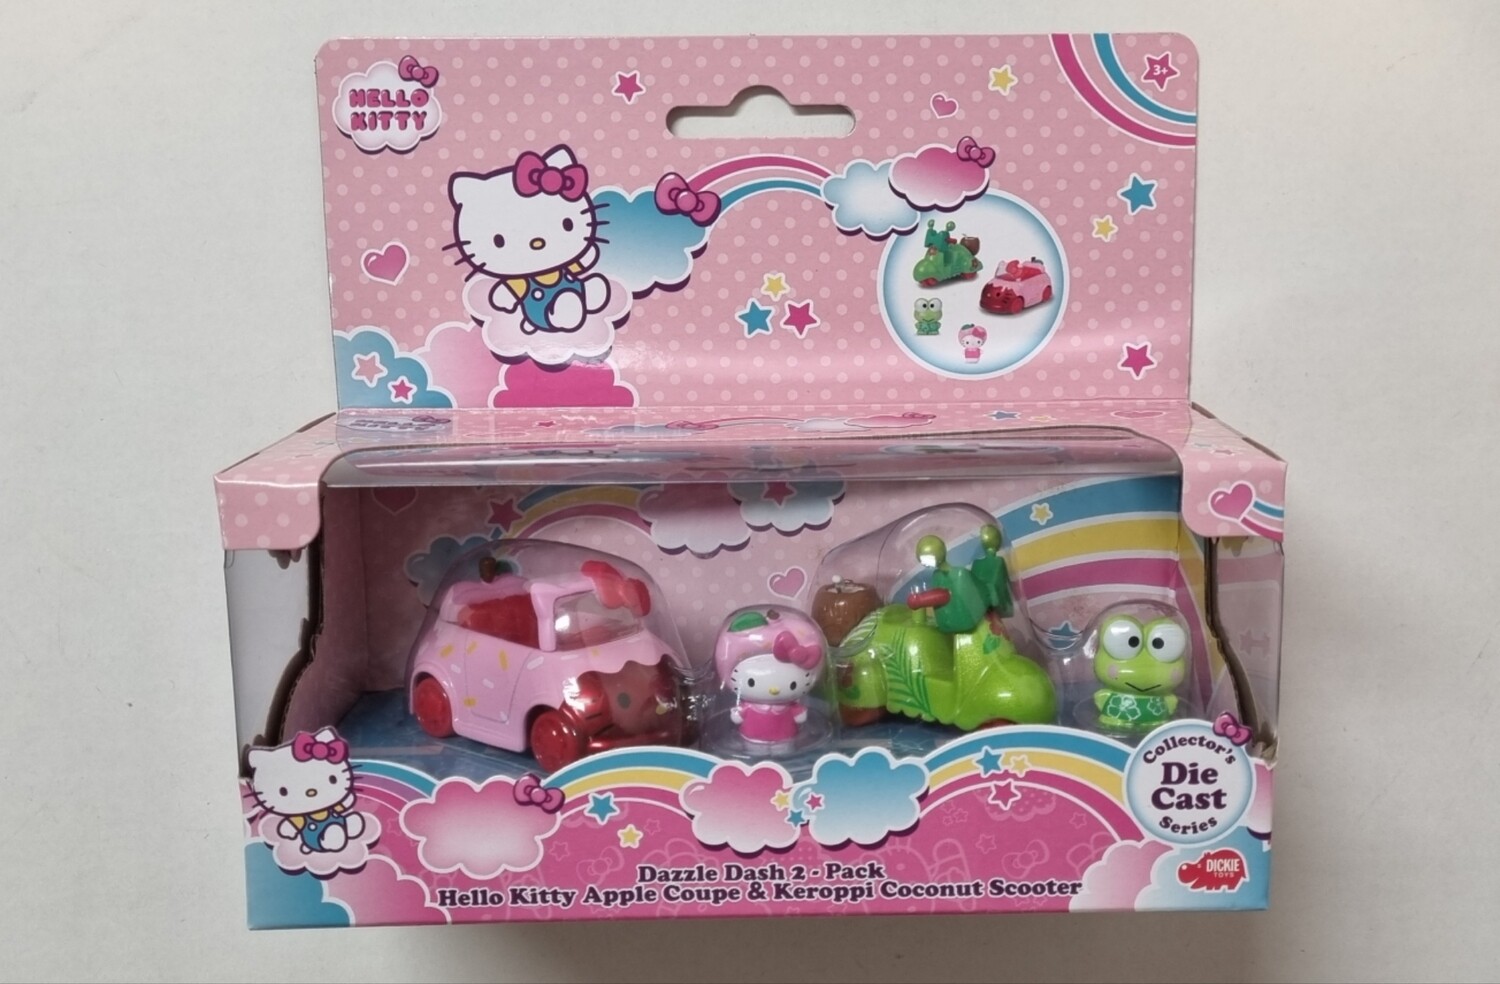 Hello Kitty, Dazzle dash, 2-pack, Apple Coupe & Keroppi Coconut Scooter